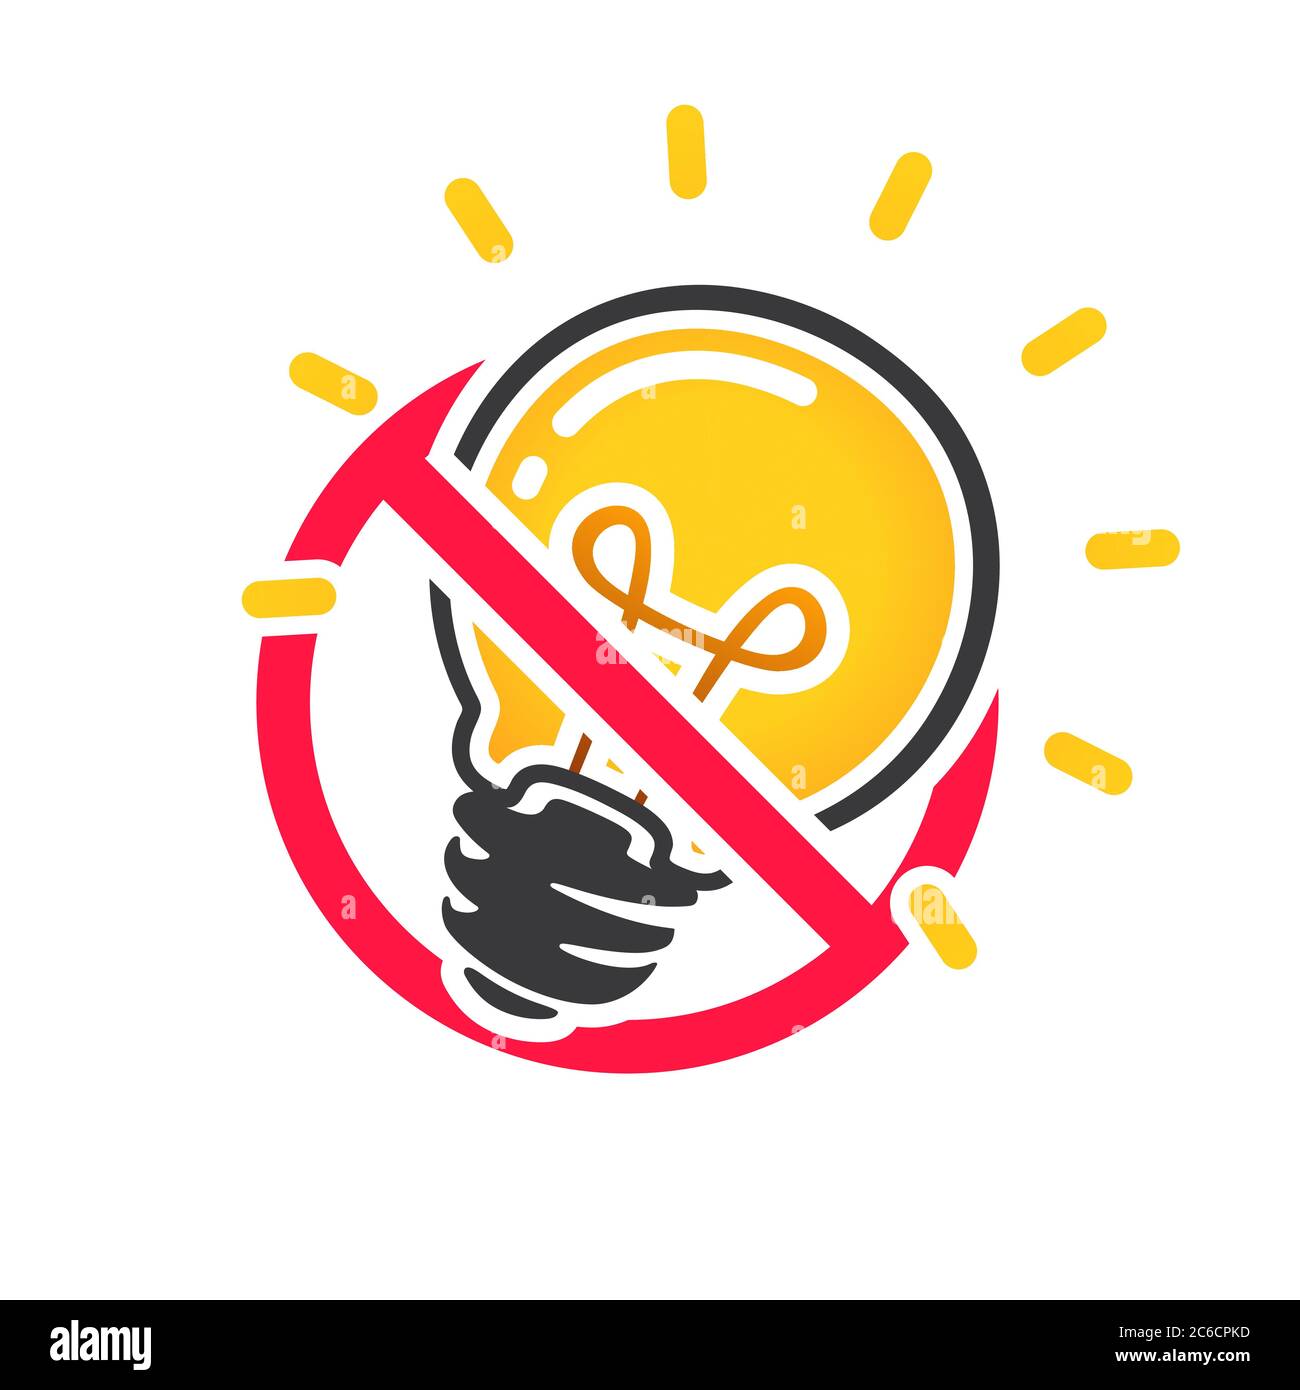 Ideas forbidden vector sign. No idea concept. No light. Isolated on white background. Do not turn on light. Stock Vector